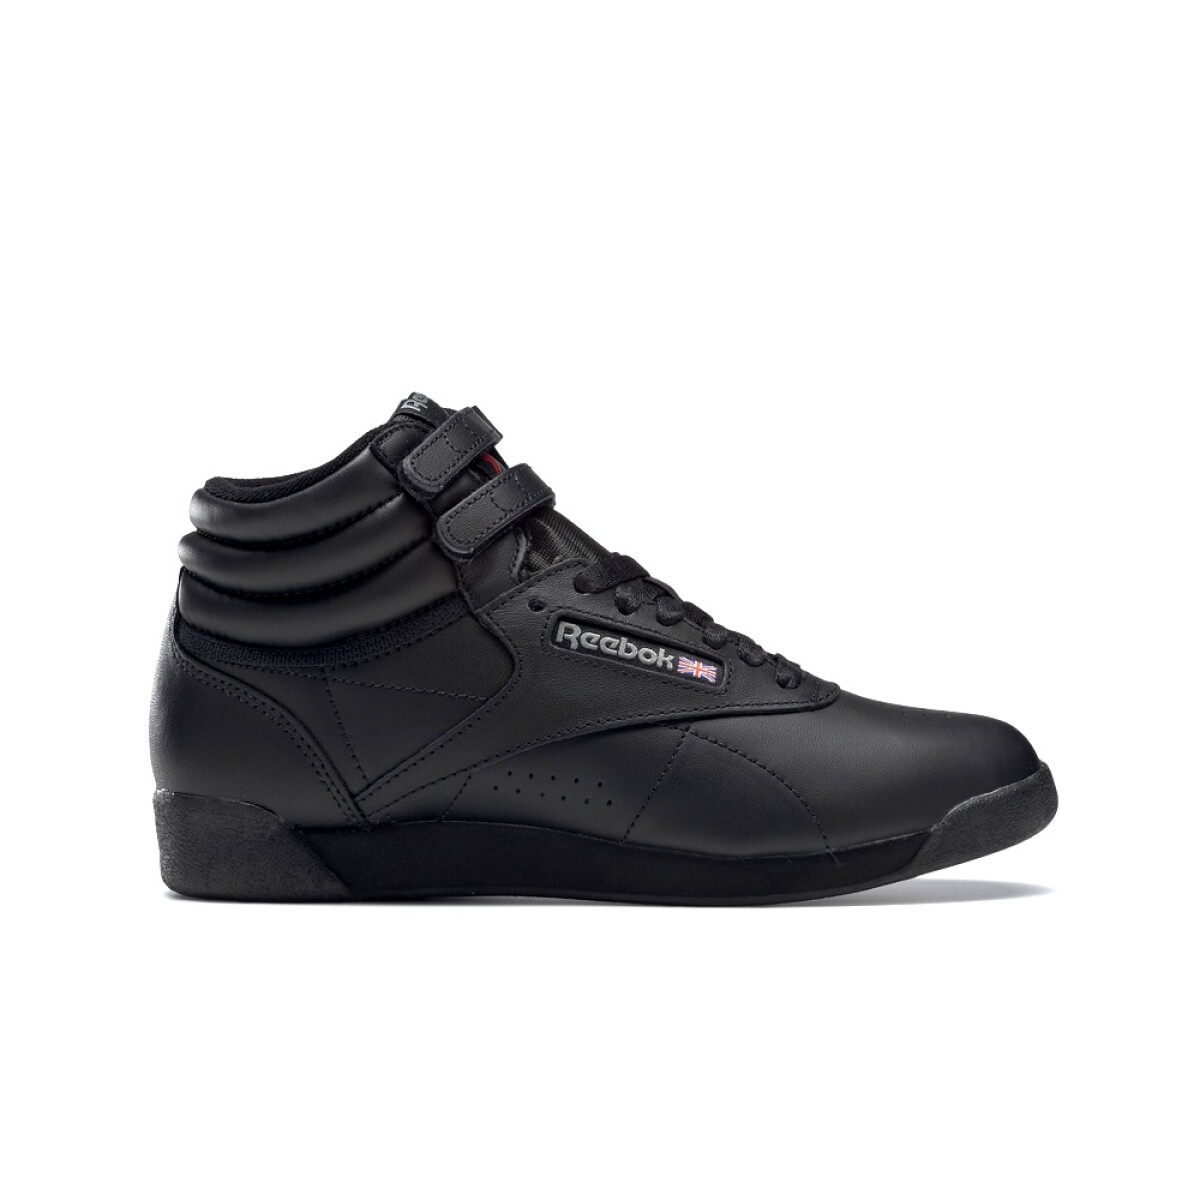 Championes Reebok Mujer Freestyle High Classic 2240 Casual - Negro 